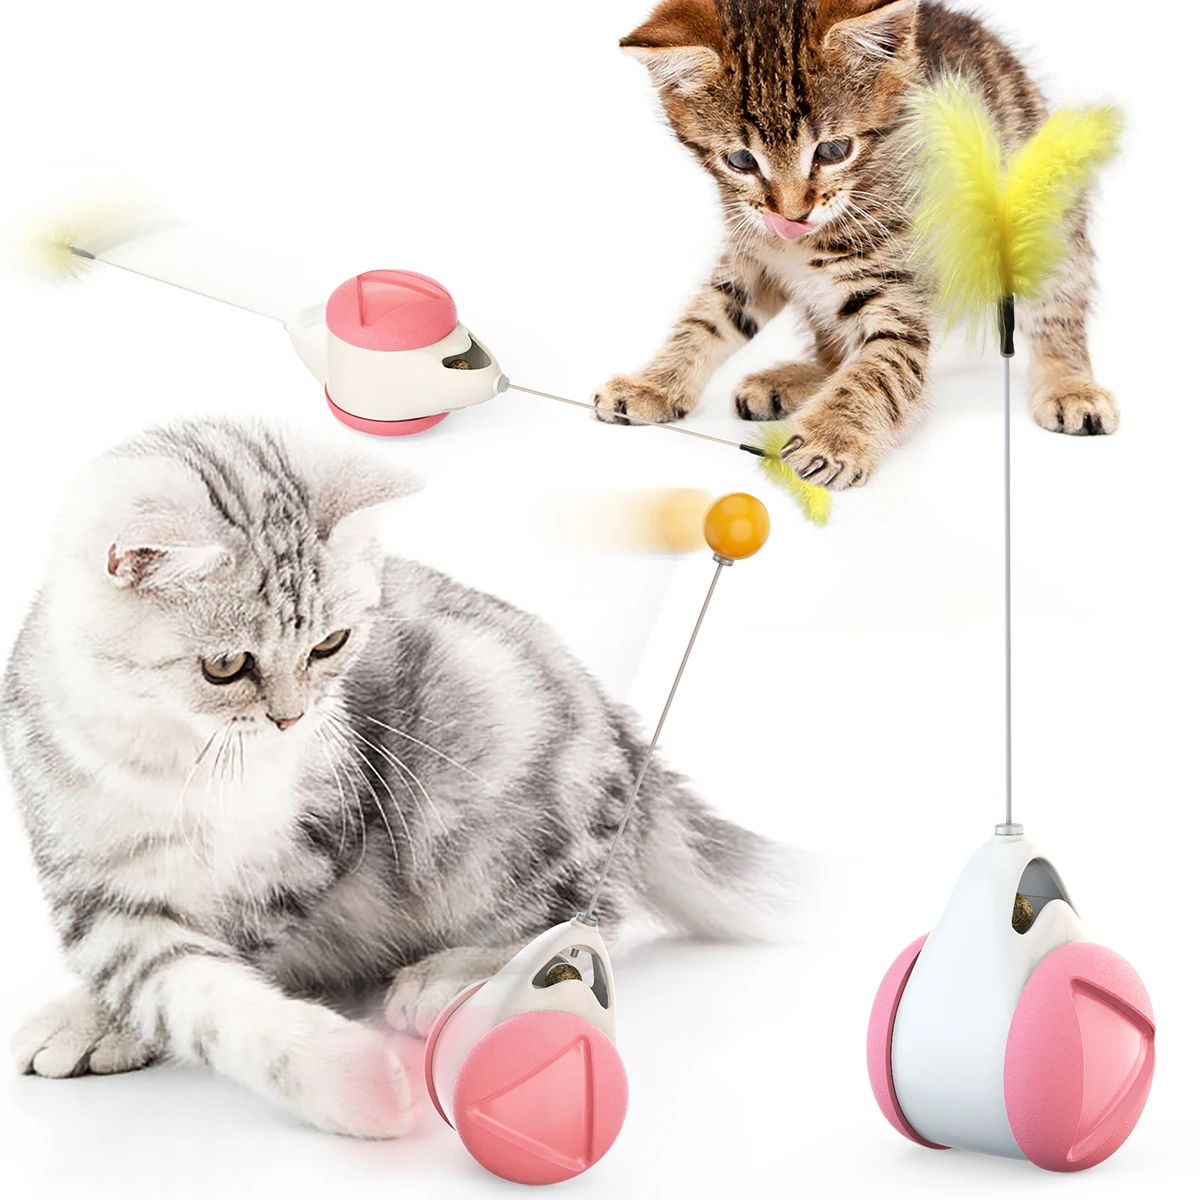 

Hot Sale Tumbler Swing Toys For Cats Kitten Interactive Balance Car Cat Chasing Toy With Catnip Funny Pet Products, Picture showed